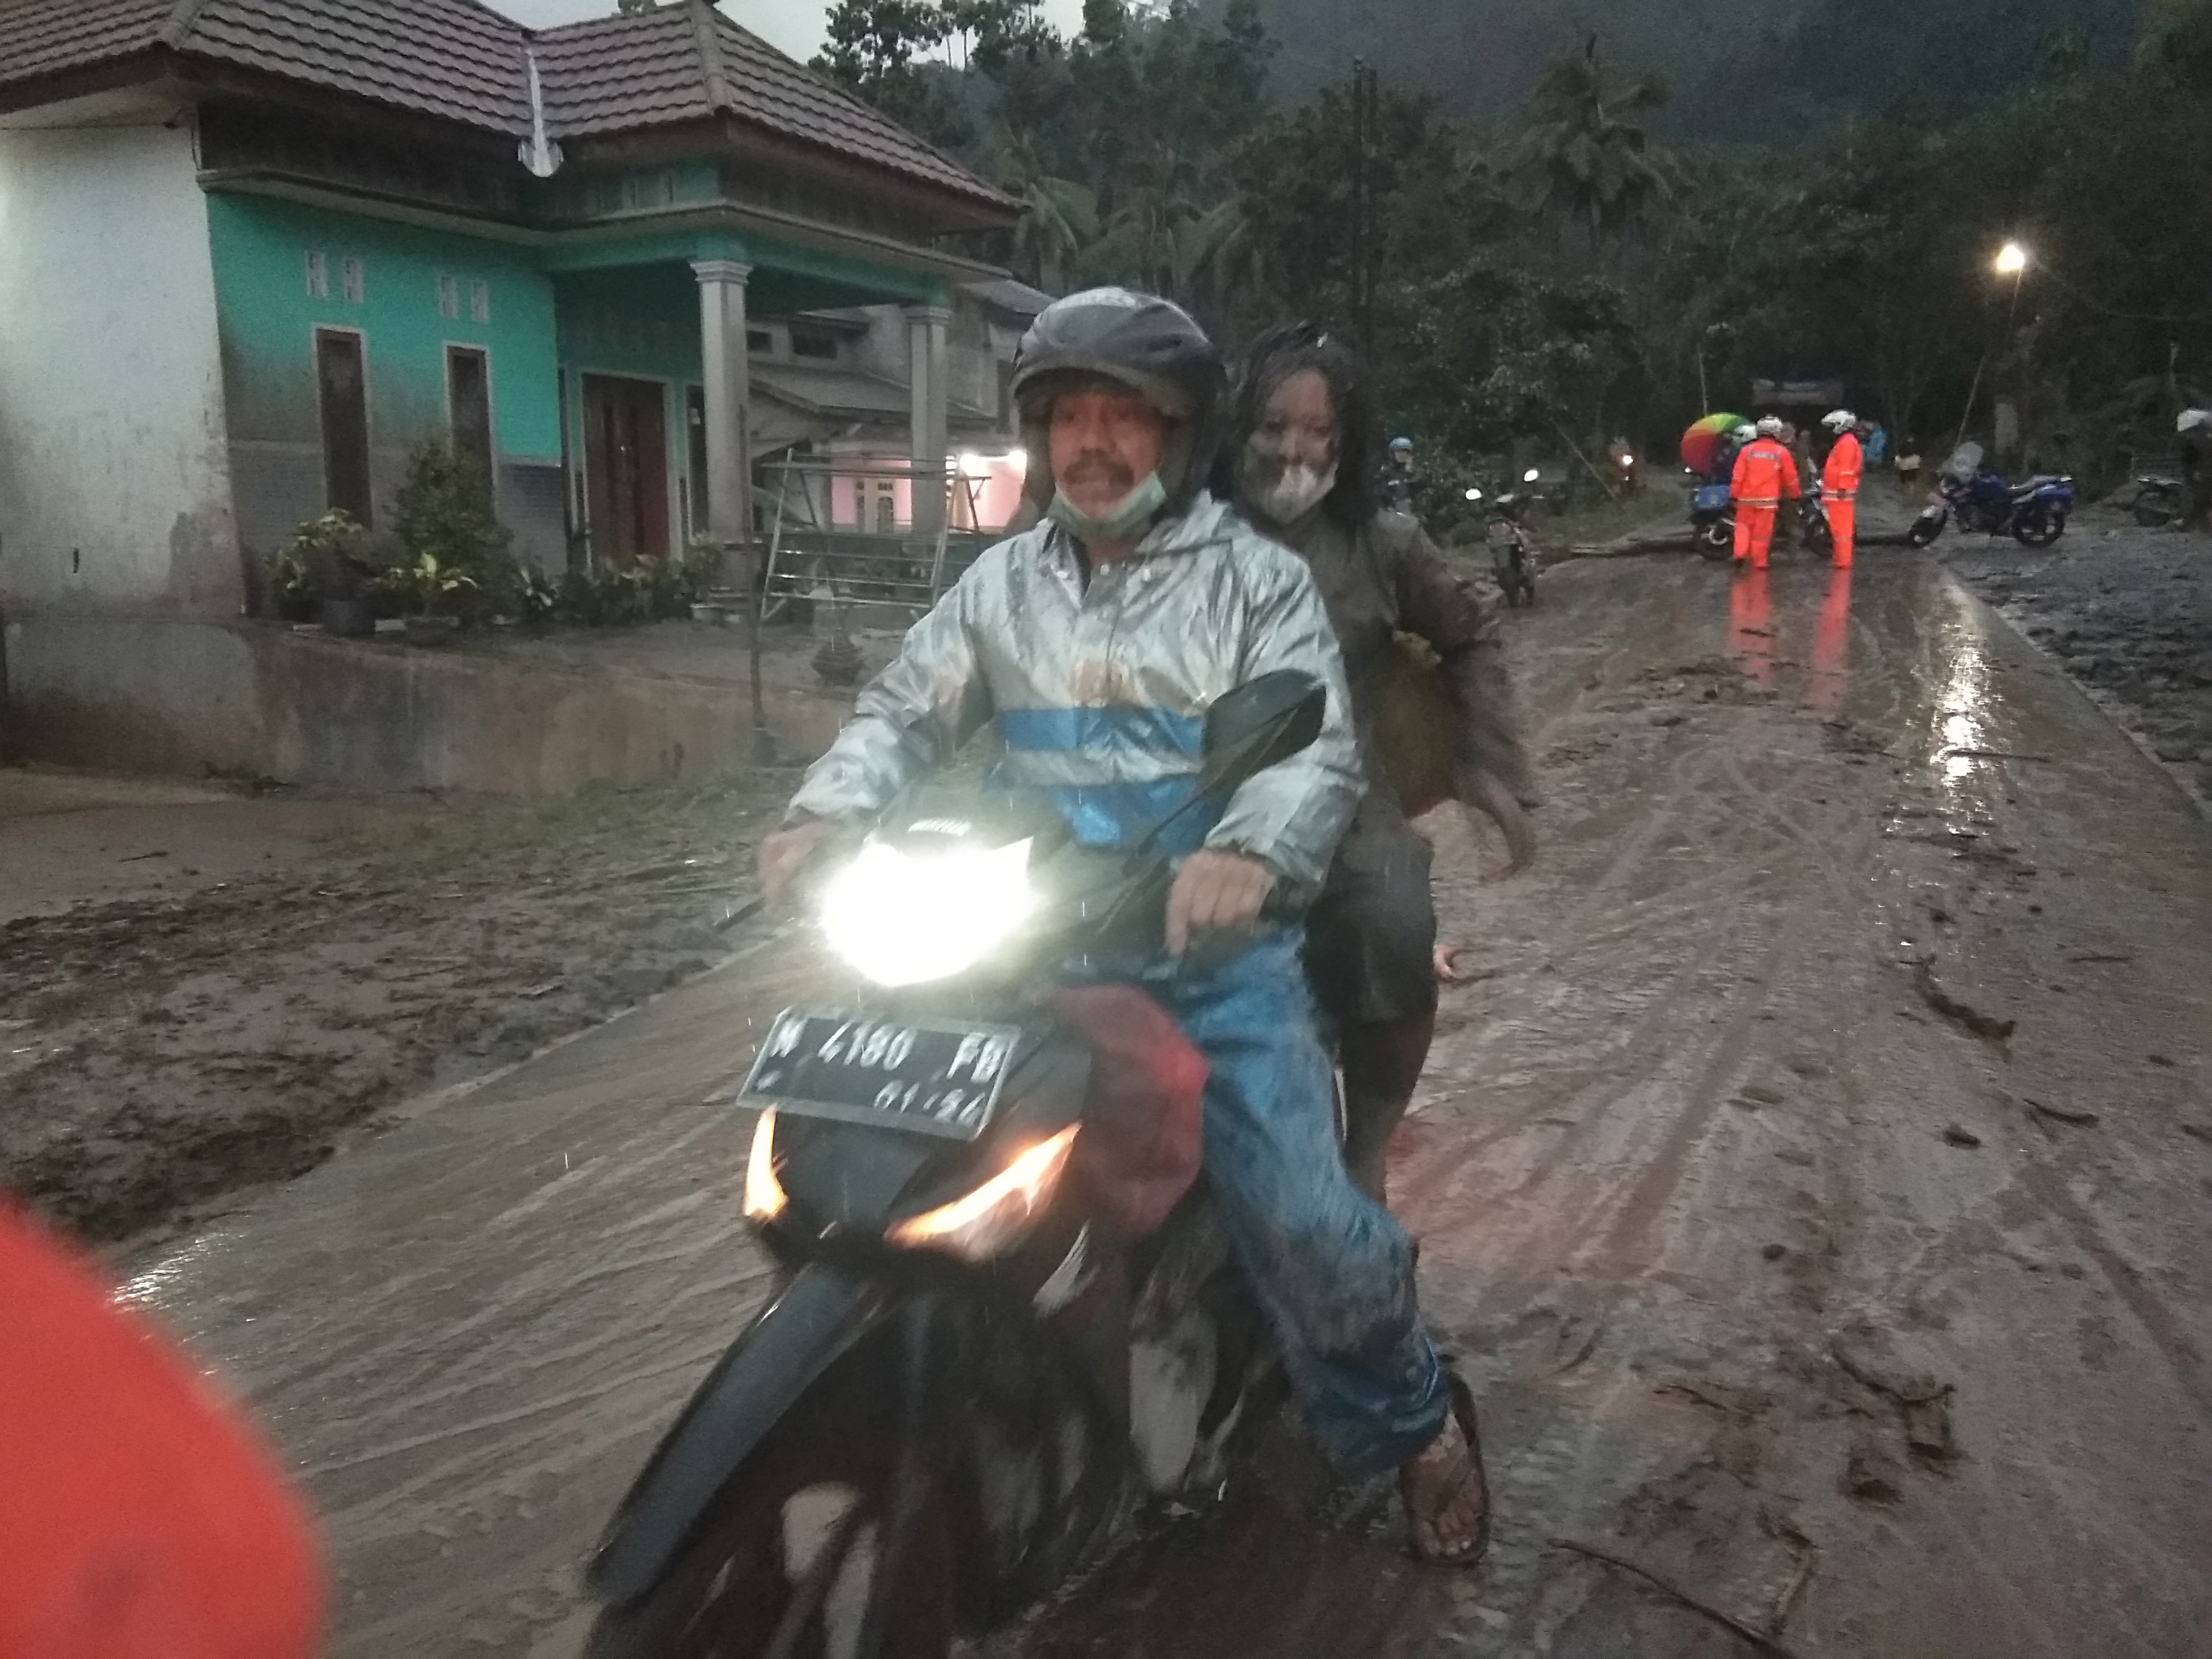 People ride a motorbike on a road that is covered with volcanic ash following an eruption of the Semeru mount volcano at Sumberwuluh village